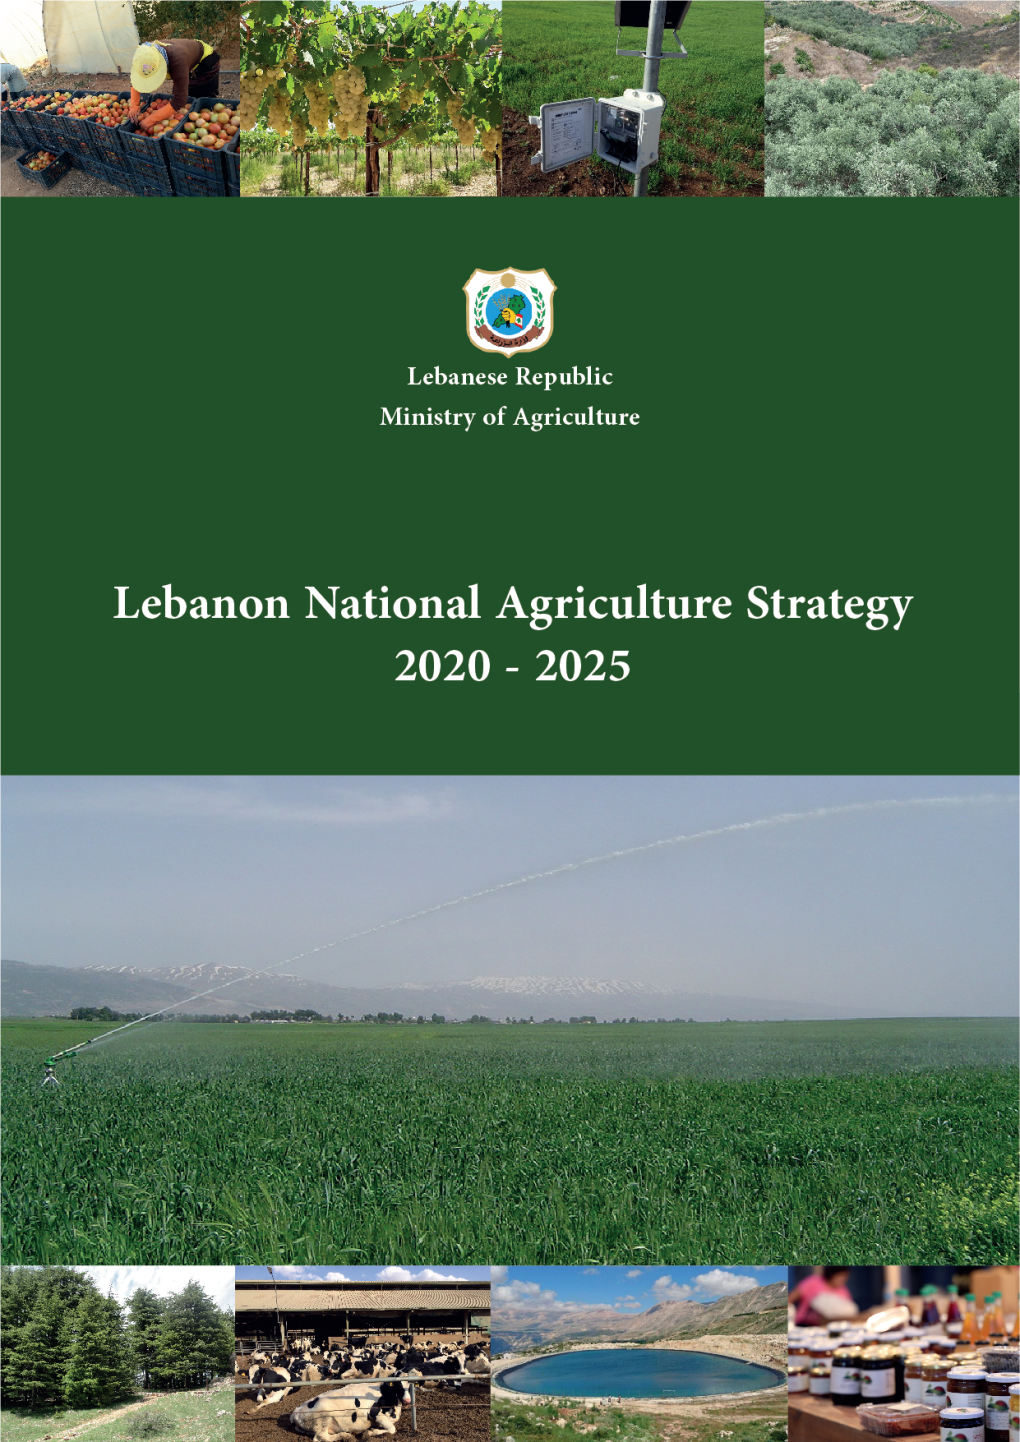 Lebanon National Agriculture Strategy 2020-2025